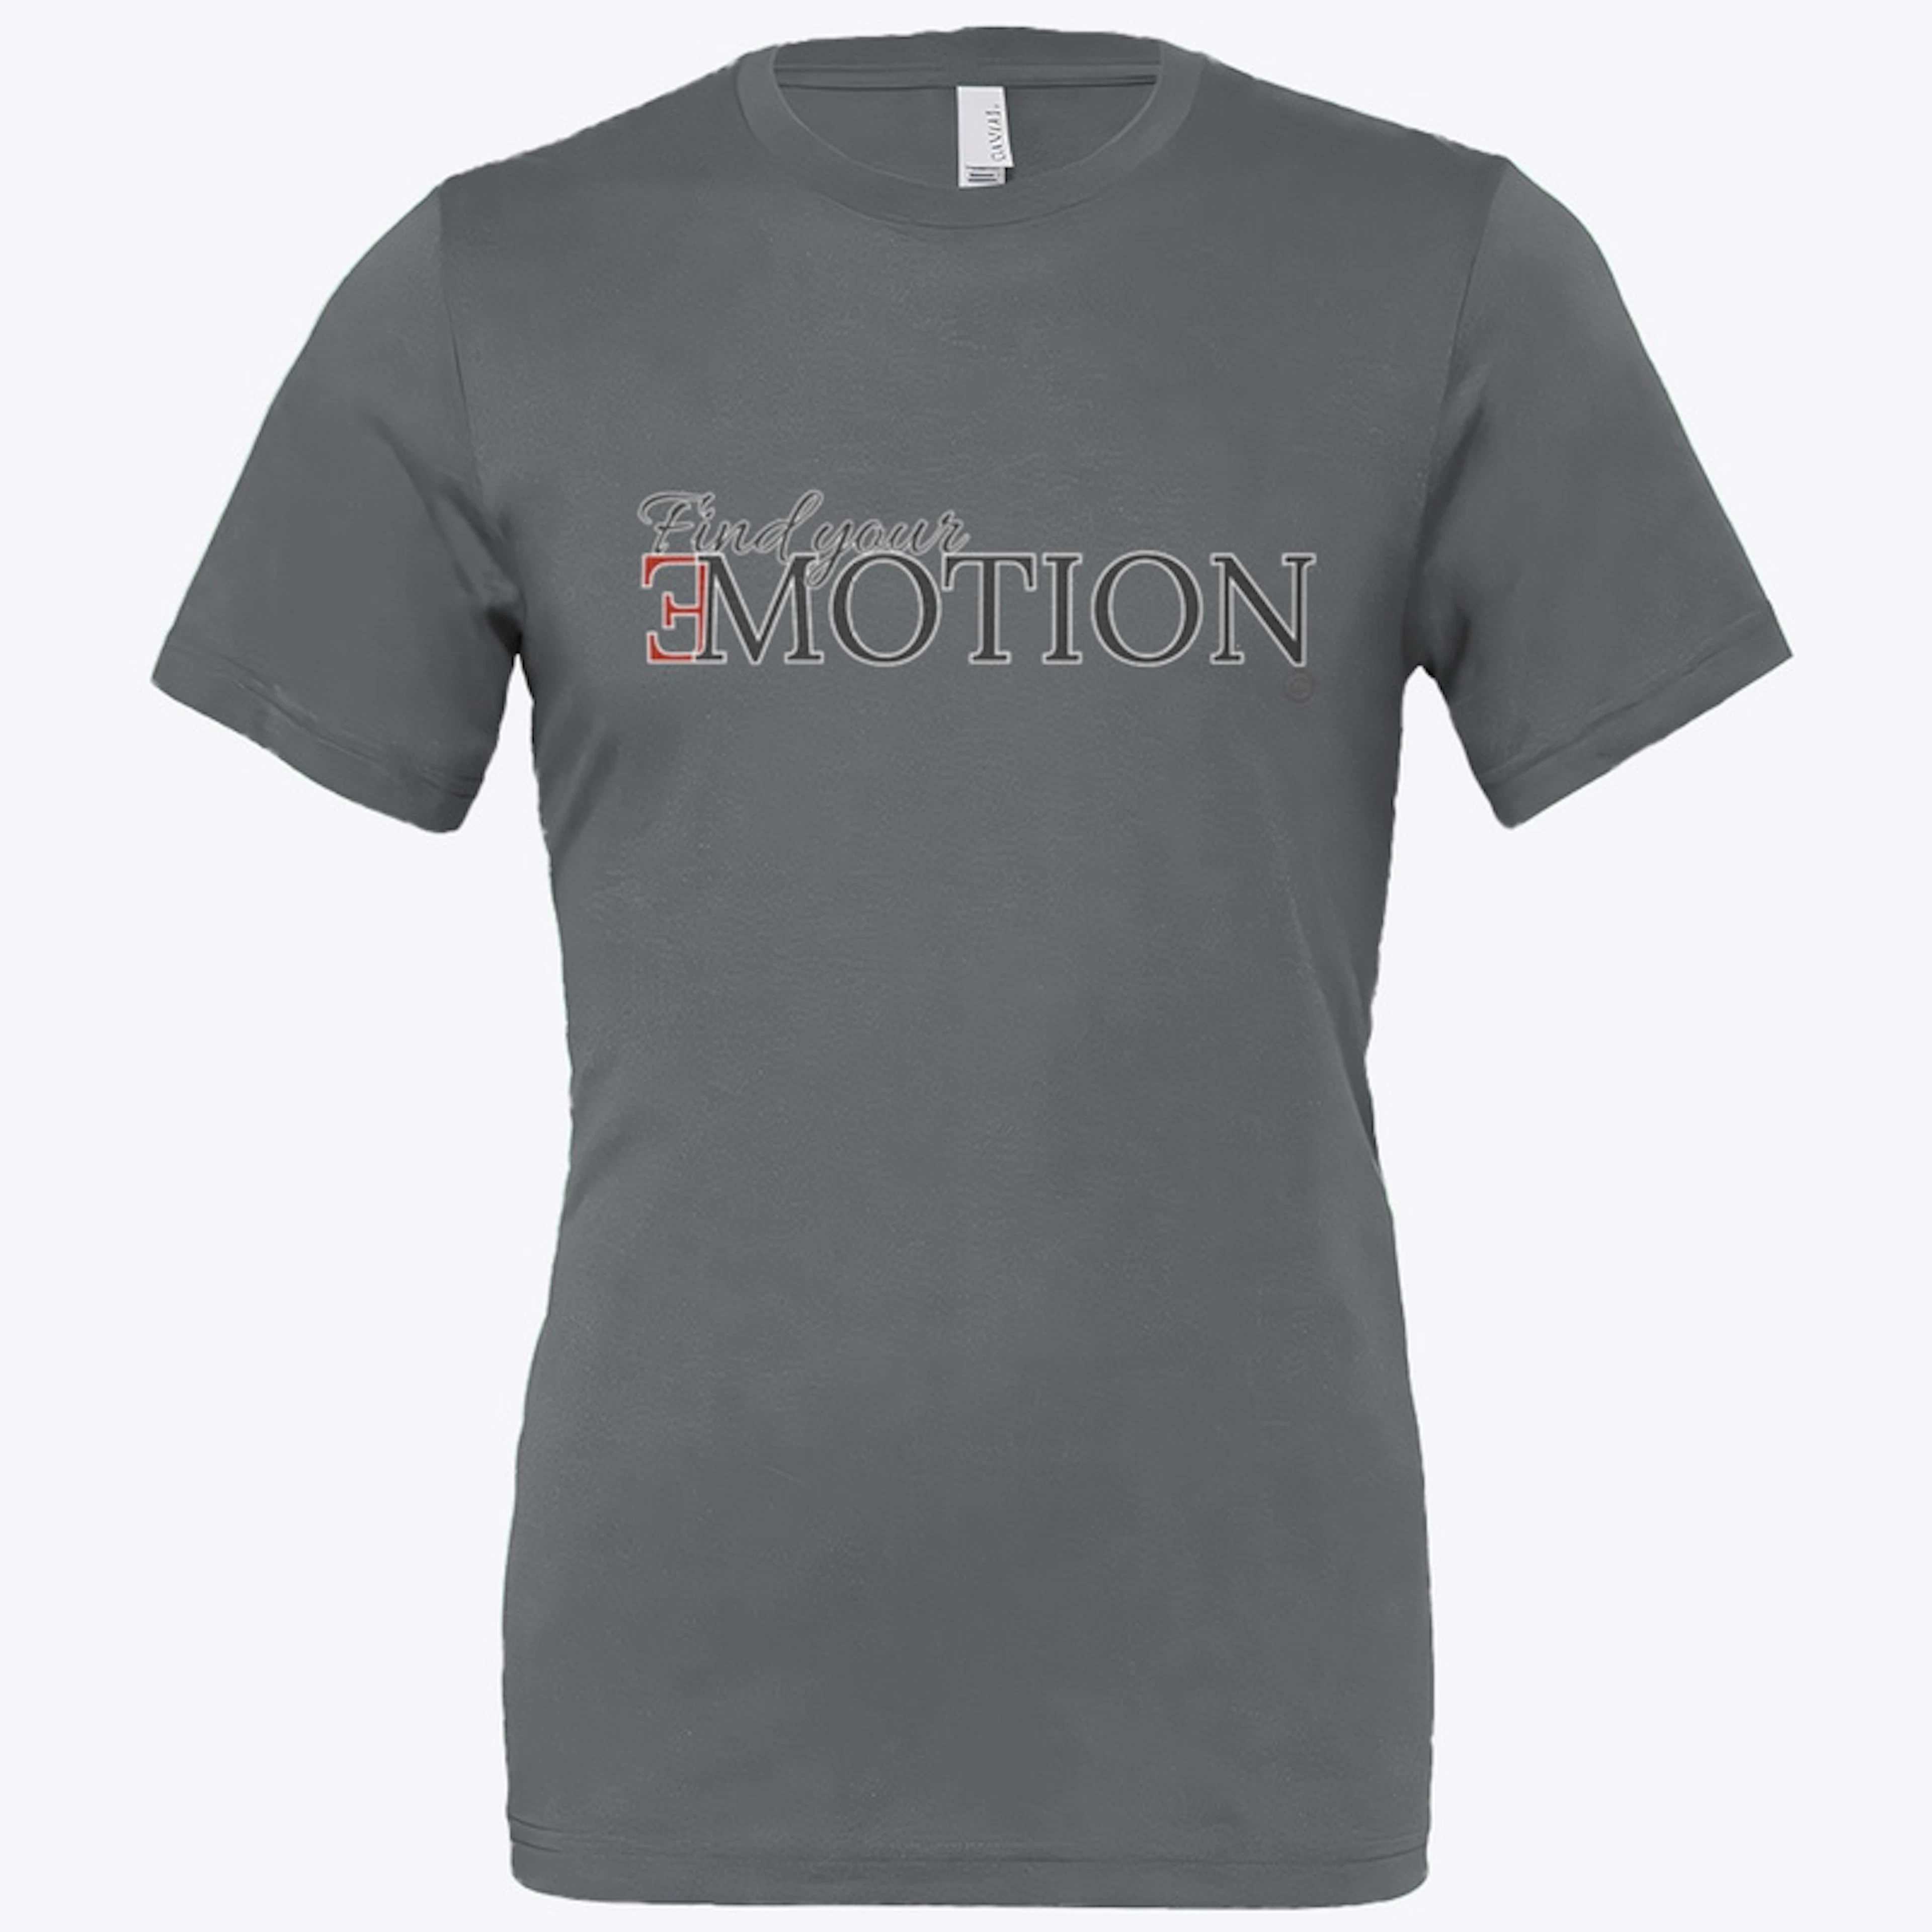 Find your motion grey tee